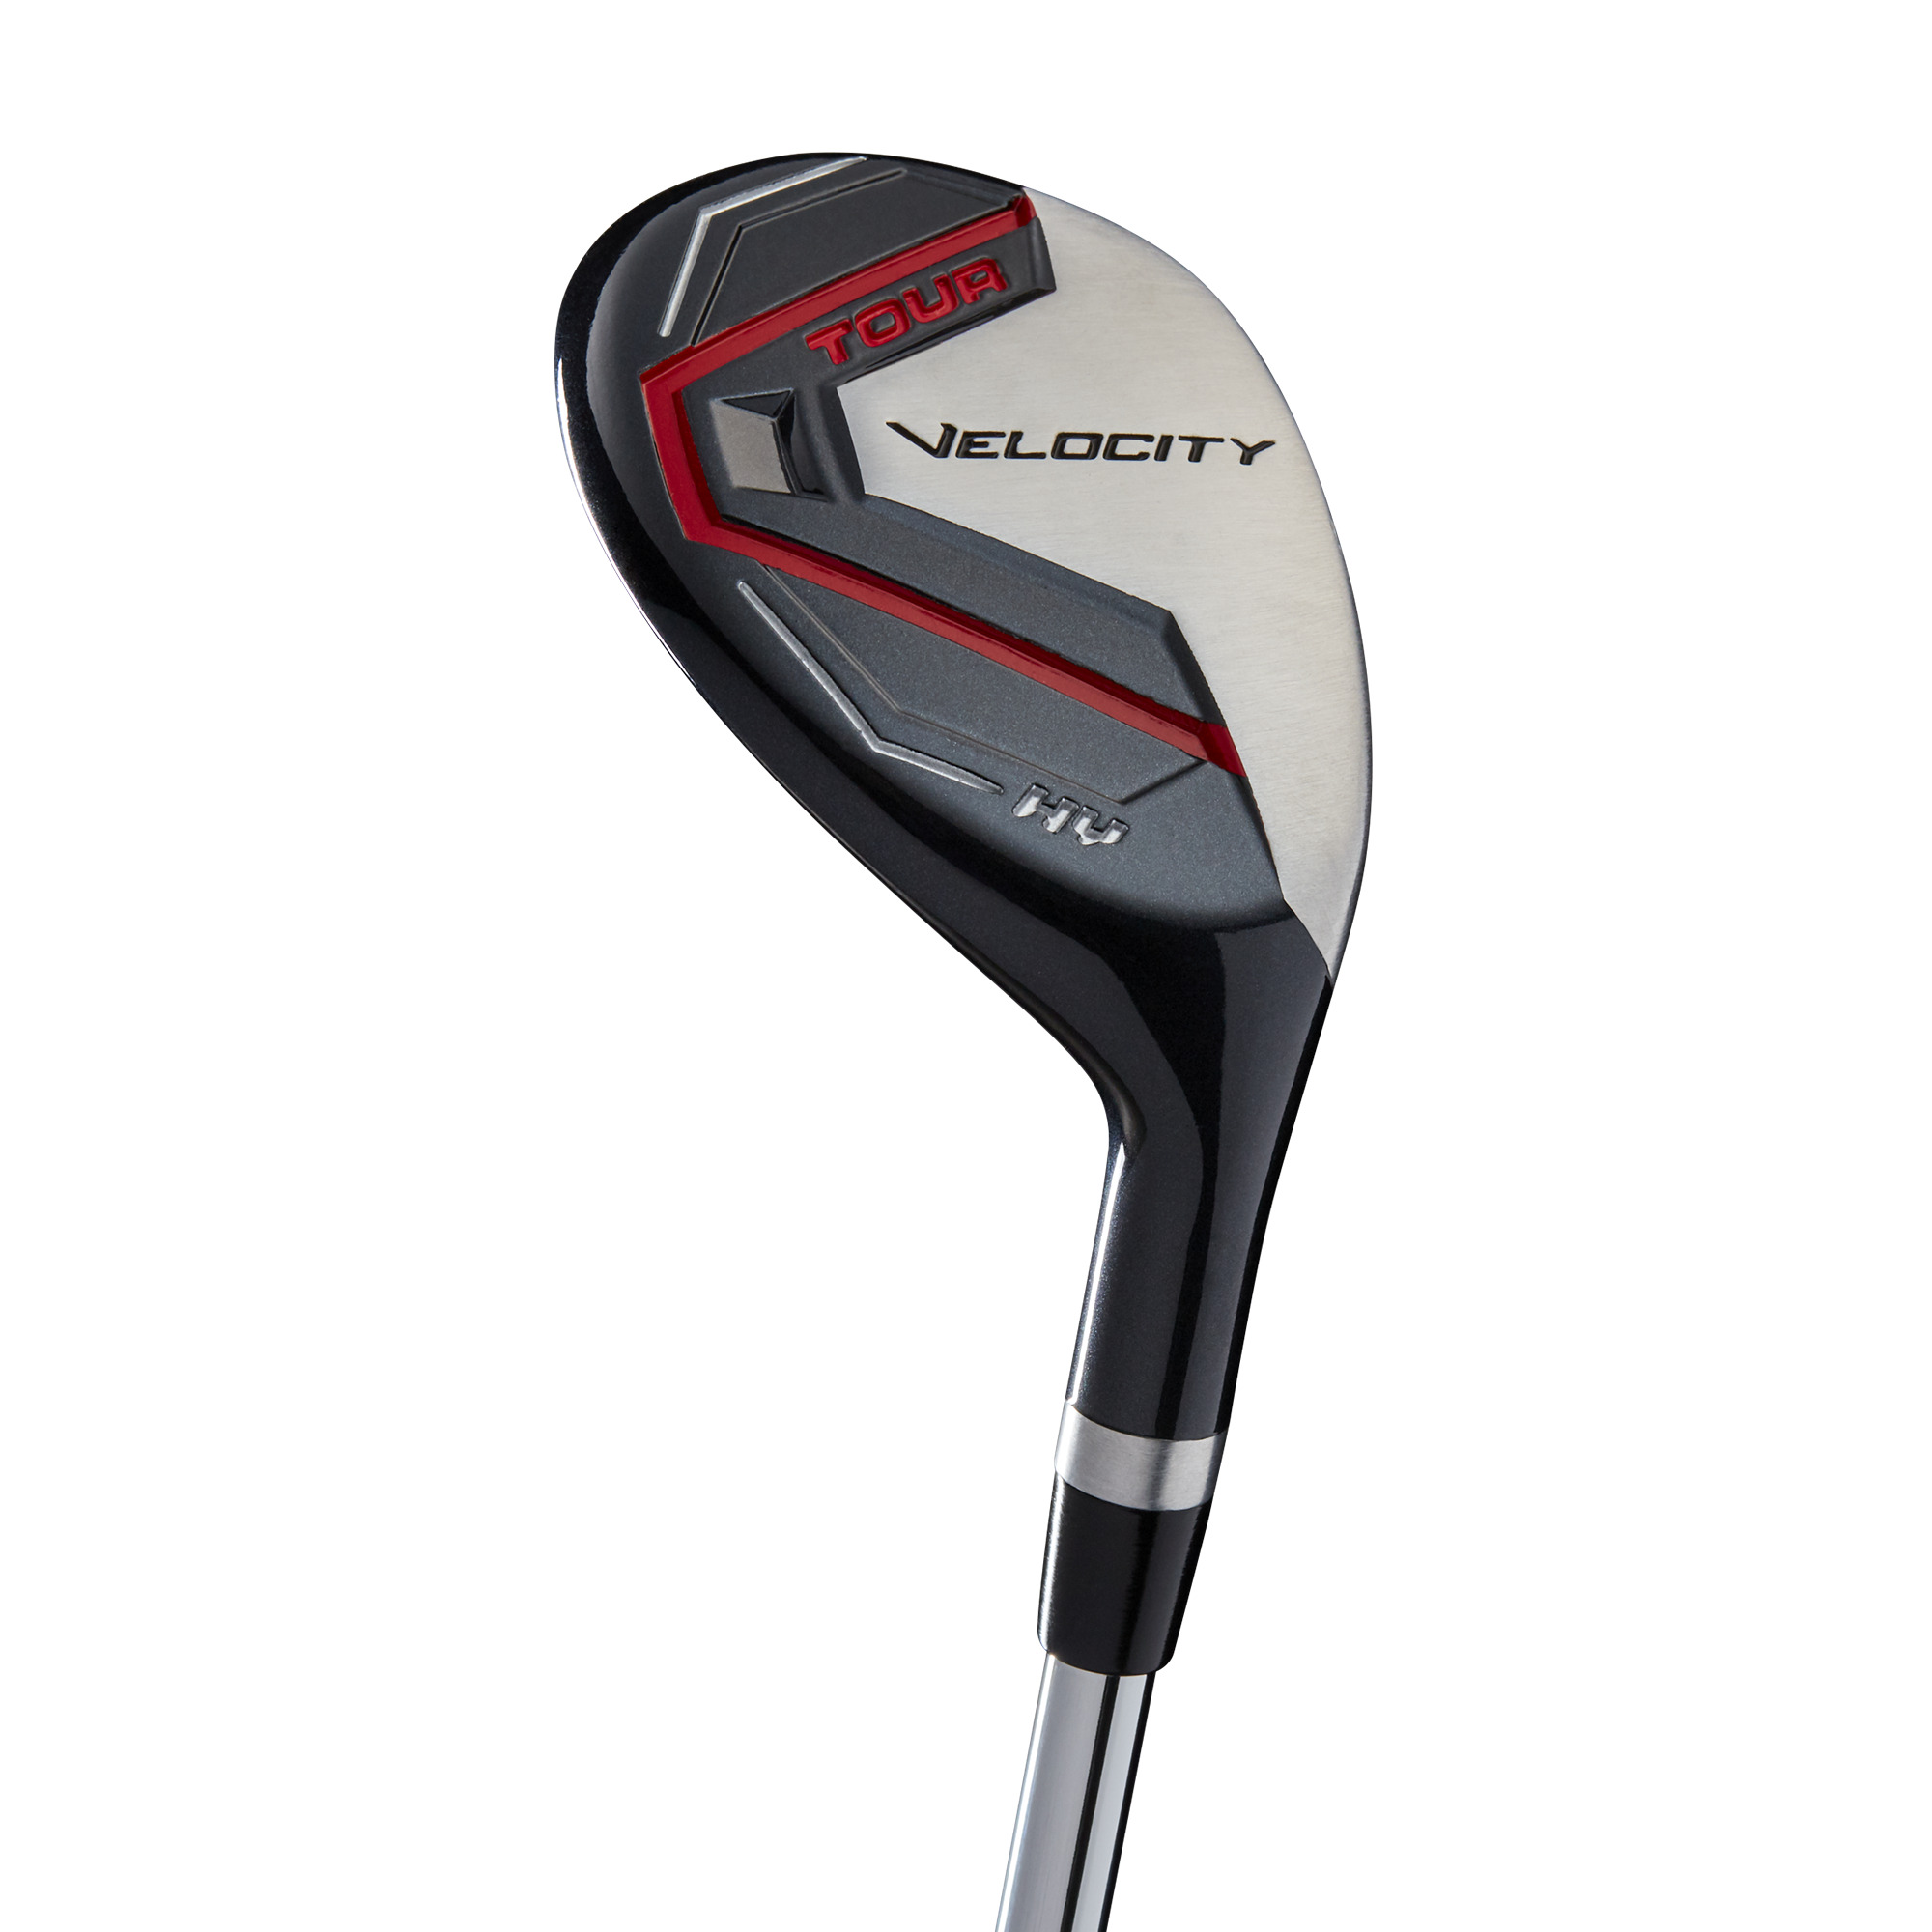 Wilson Tour Velocity Men's Golf Club Set, Right-Handed - image 5 of 7